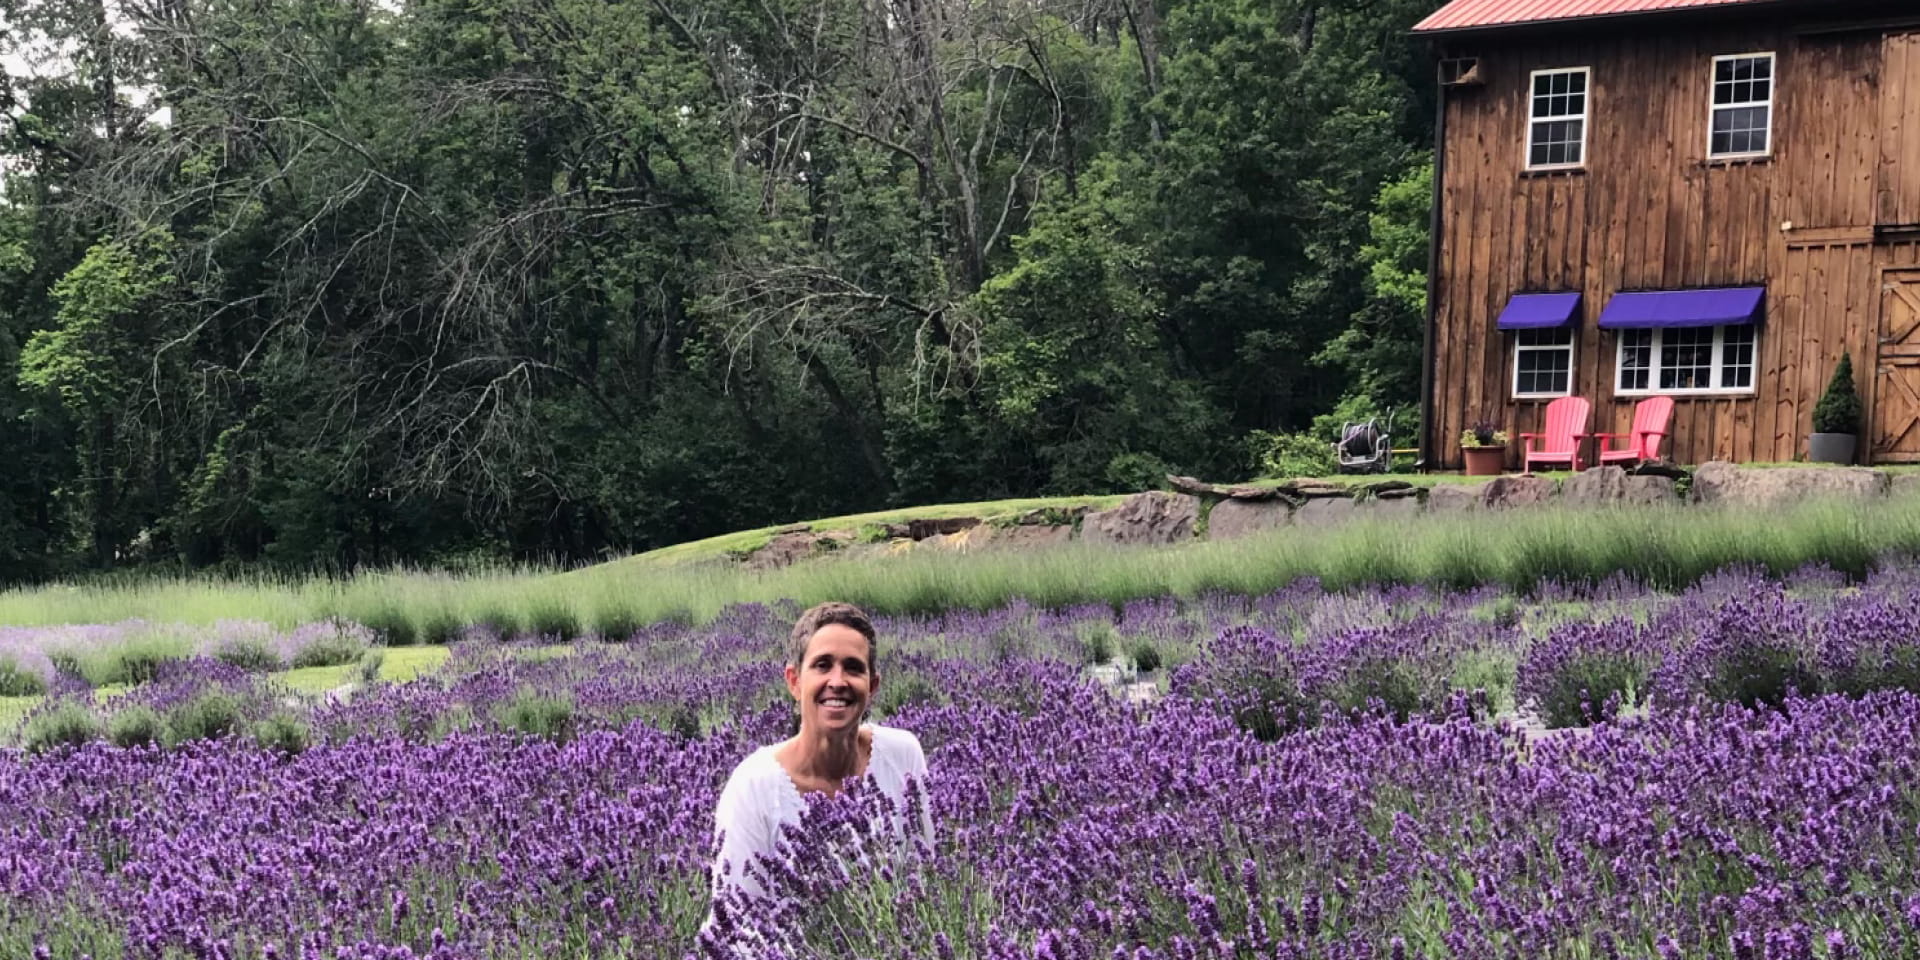 Patti Lyons in the middle of a lavender field.